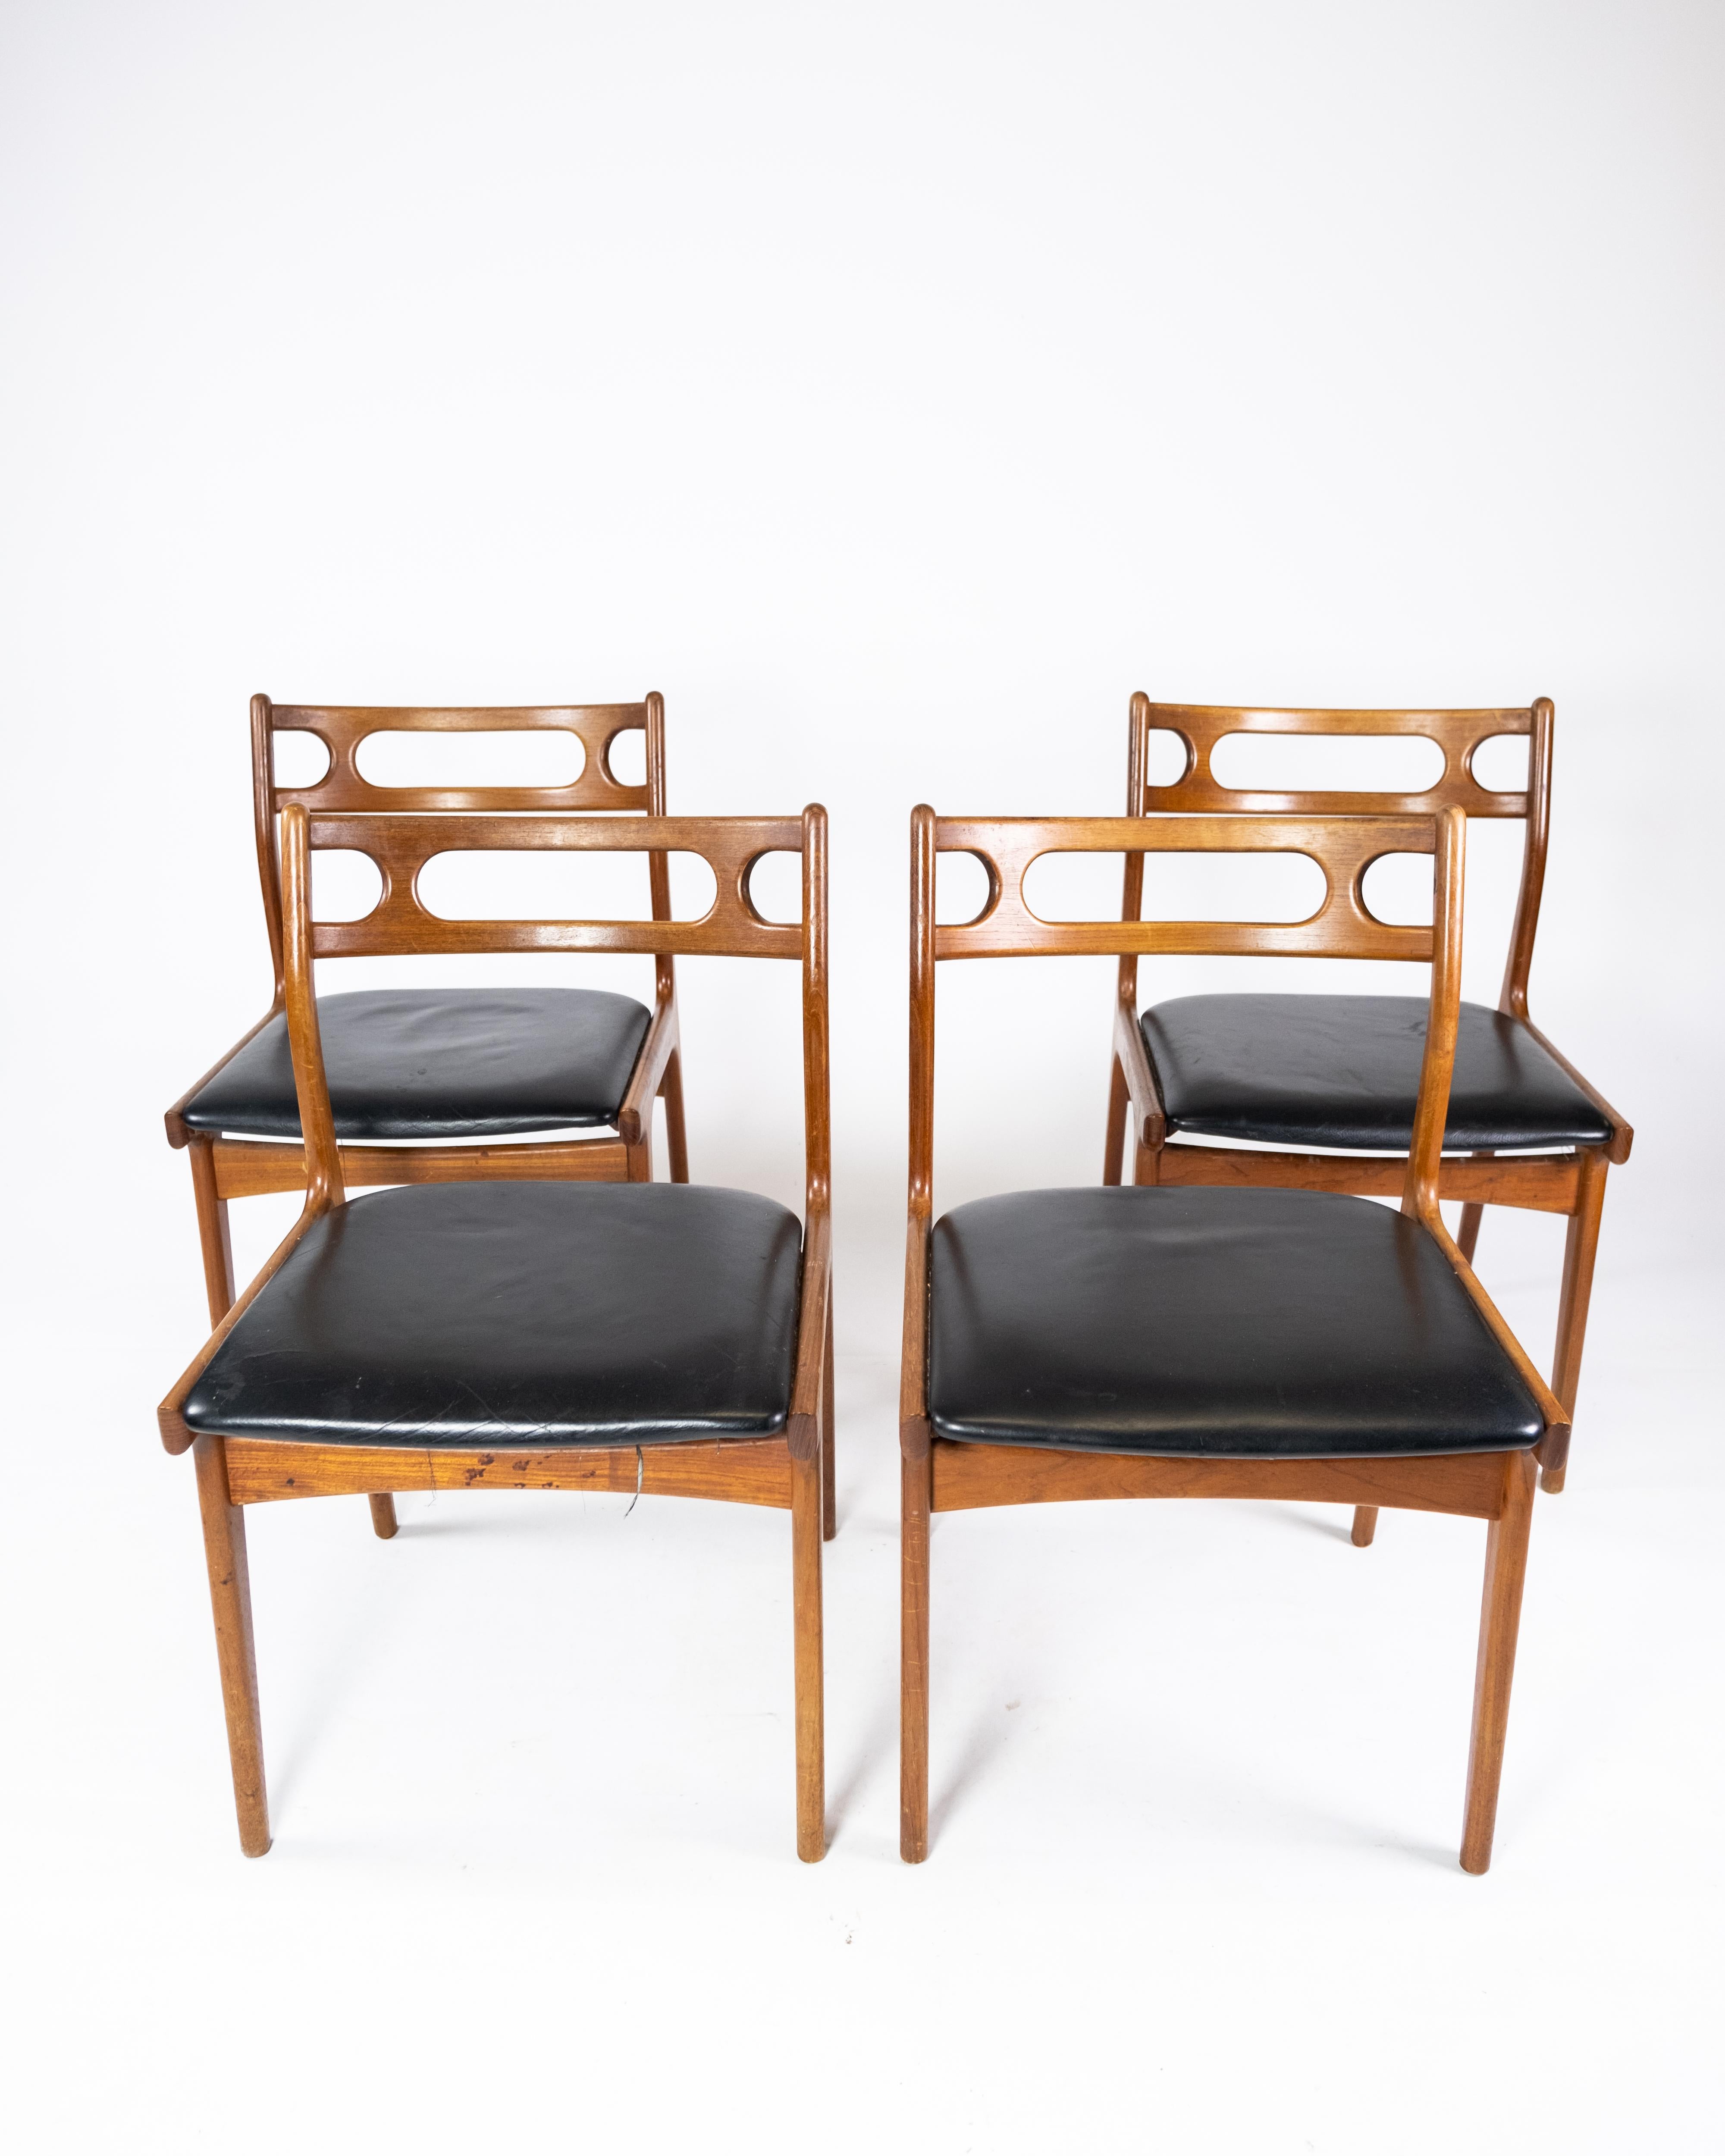 This set of four dining chairs from the 1960s is a beautiful example of the elegance and functionality of Danish furniture design. The chairs are made of solid teak wood, which gives them both durability and a warm, natural beauty.

The black